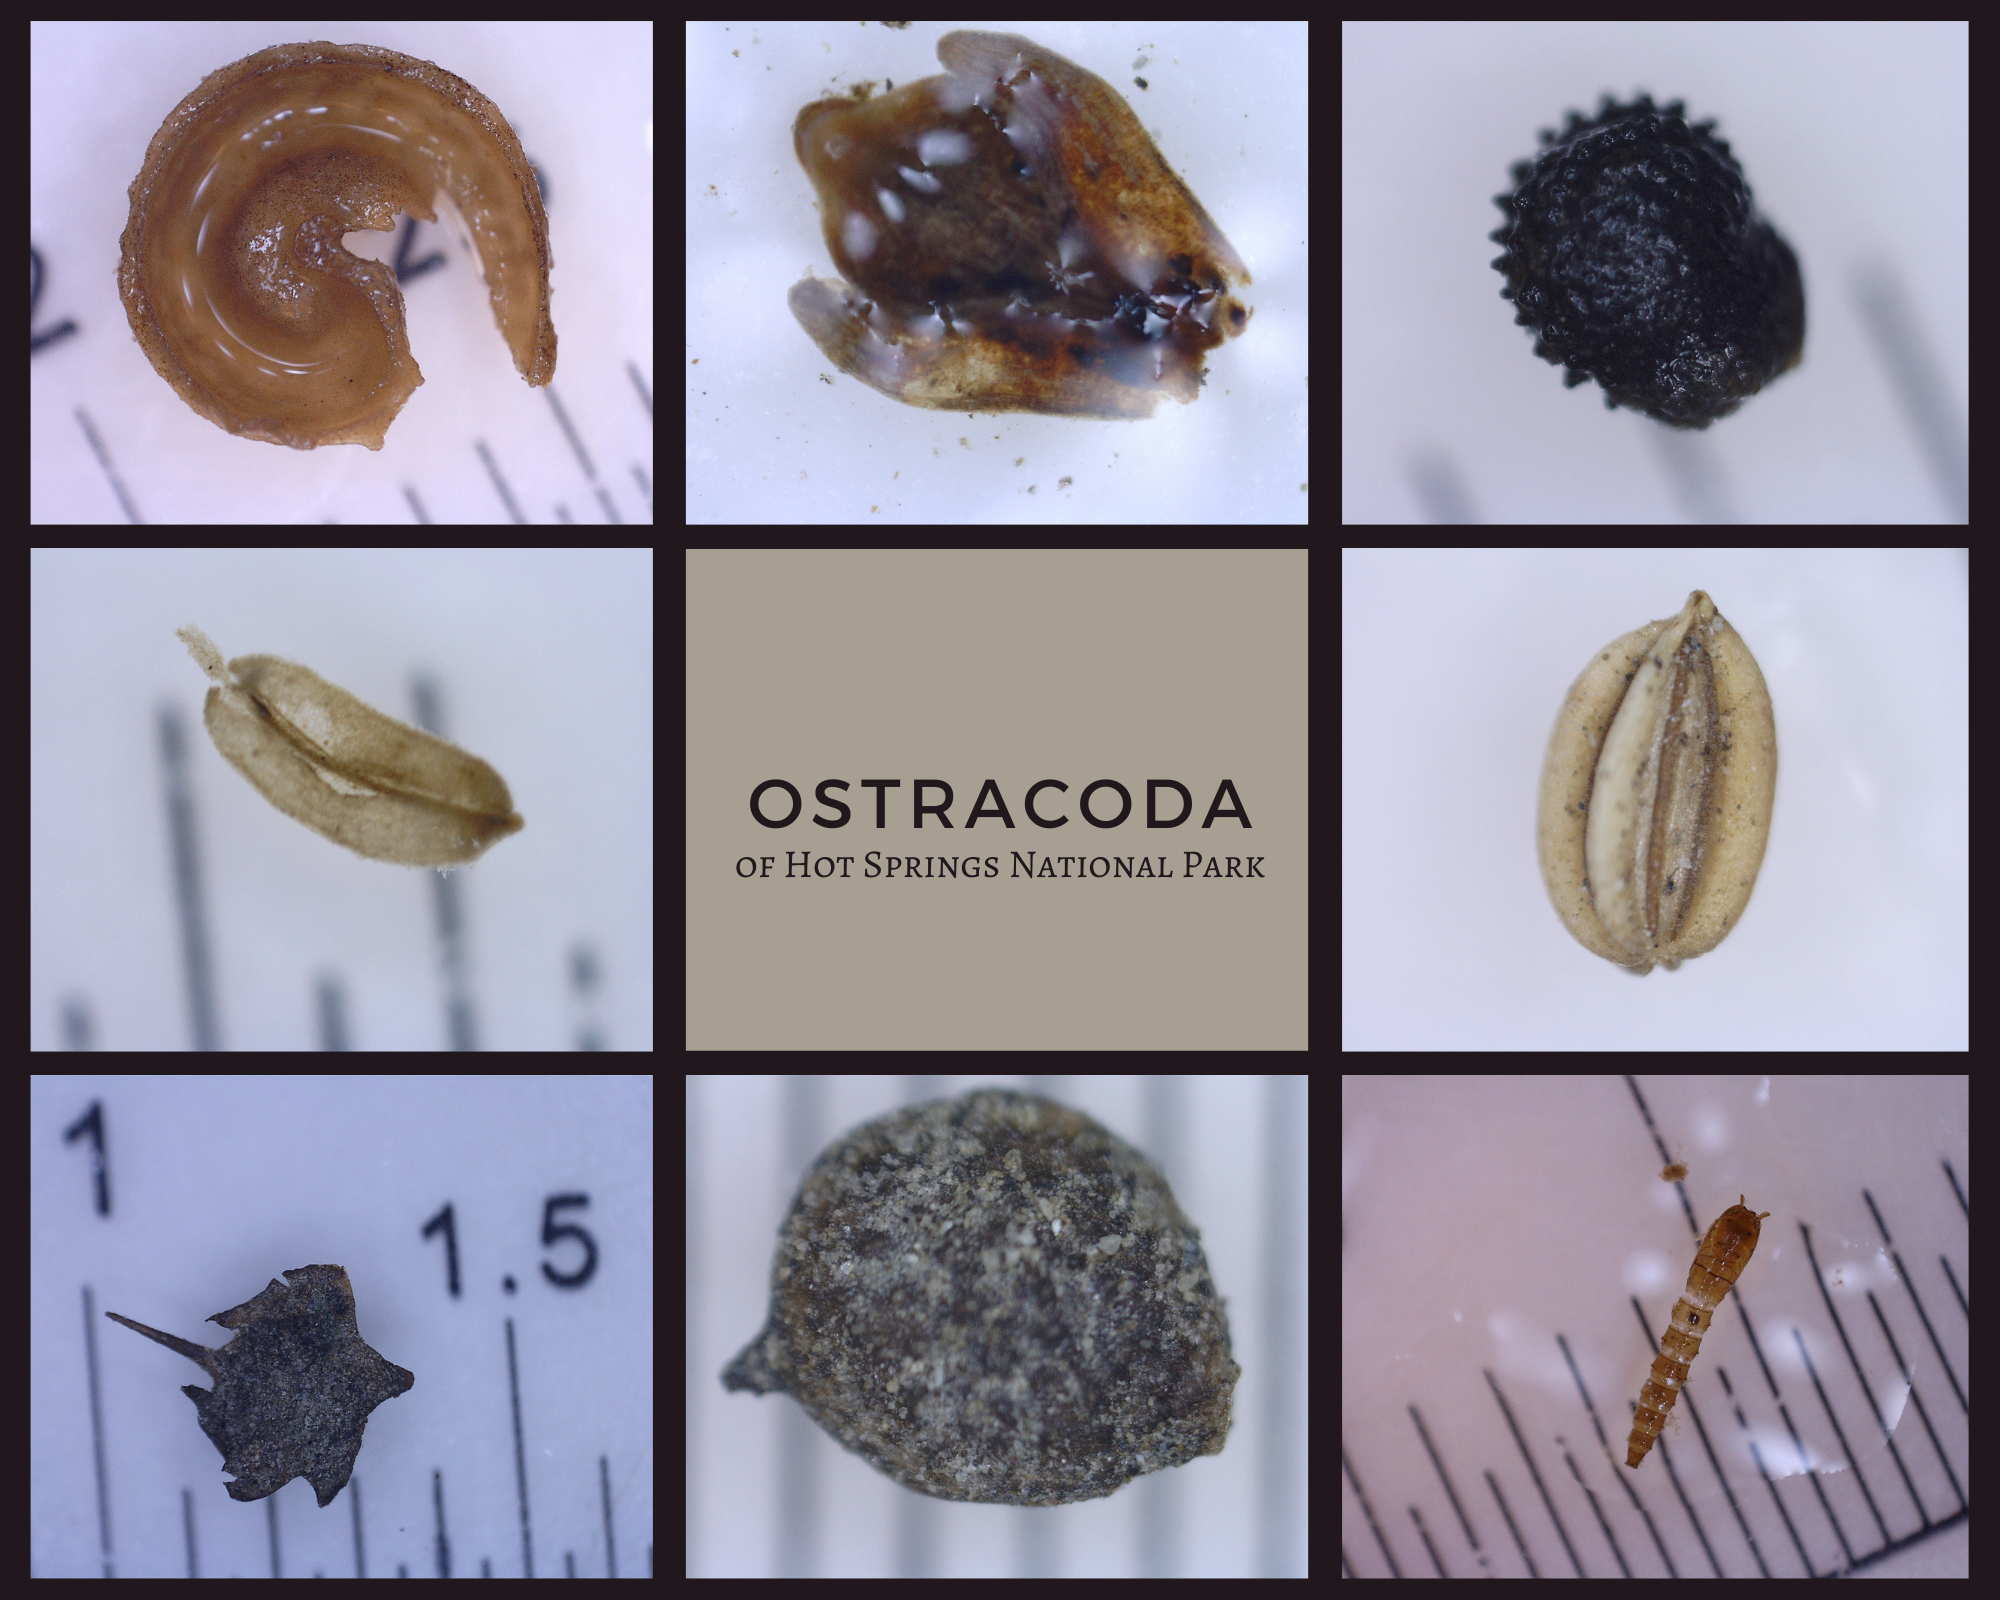 8 small photos in a collage of various kinds of tiny thermophilic crustaceans found in our hot springs. They are tan, black, orange textured creatures that look like shrimp, snails and/or beetles.